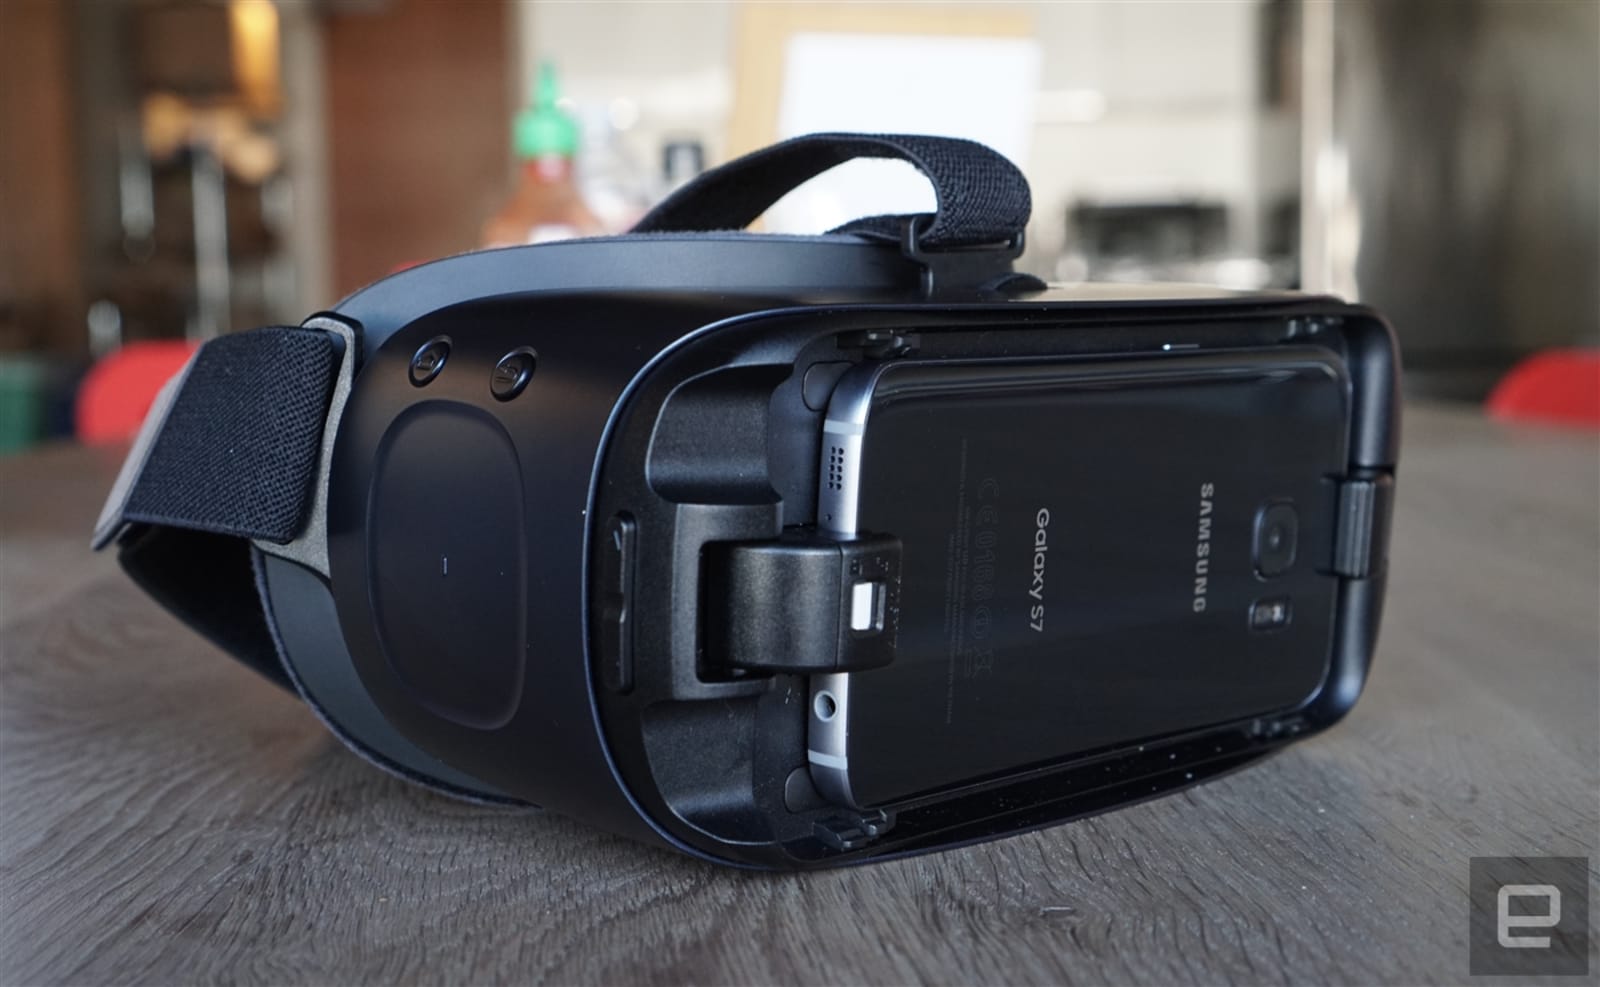 Samsung's Gear VR is its comfortable and yet | Engadget